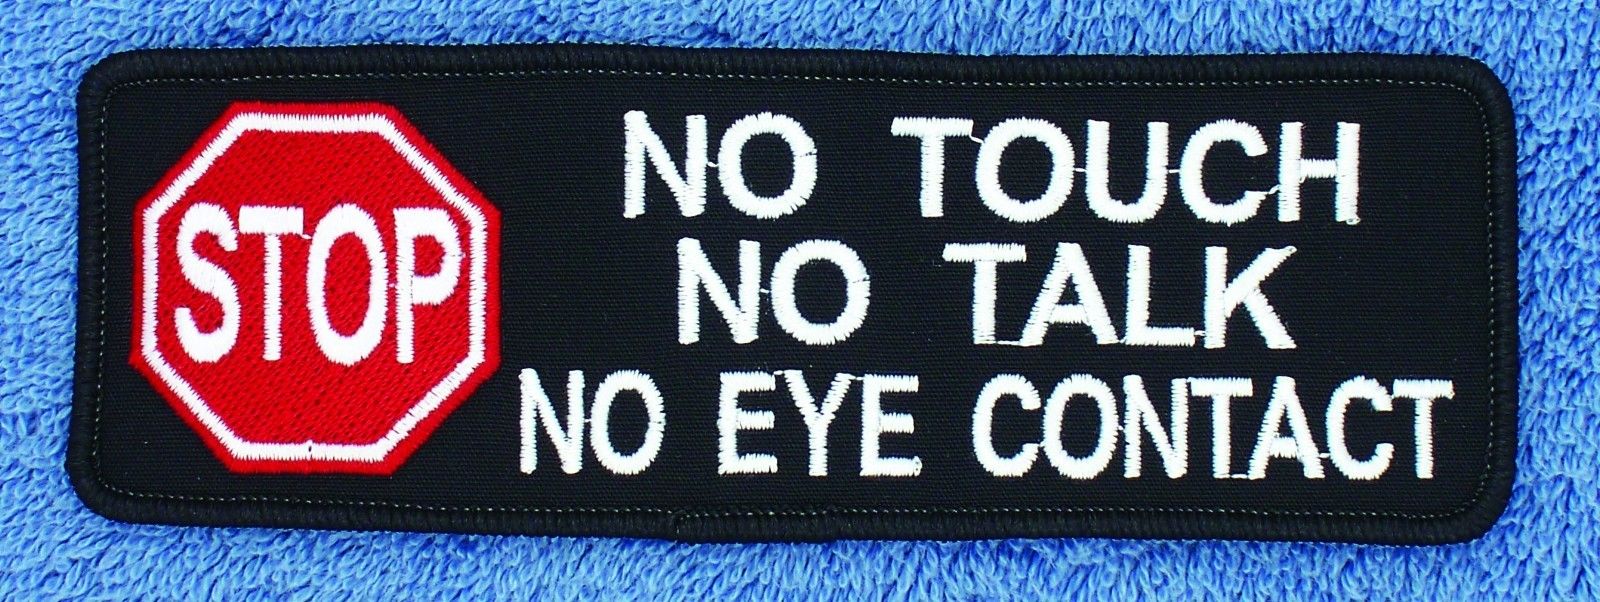 Stop No Touch Talk Eye Contact Service Dog Patch 2X6 Assistance Danny & LuAnn